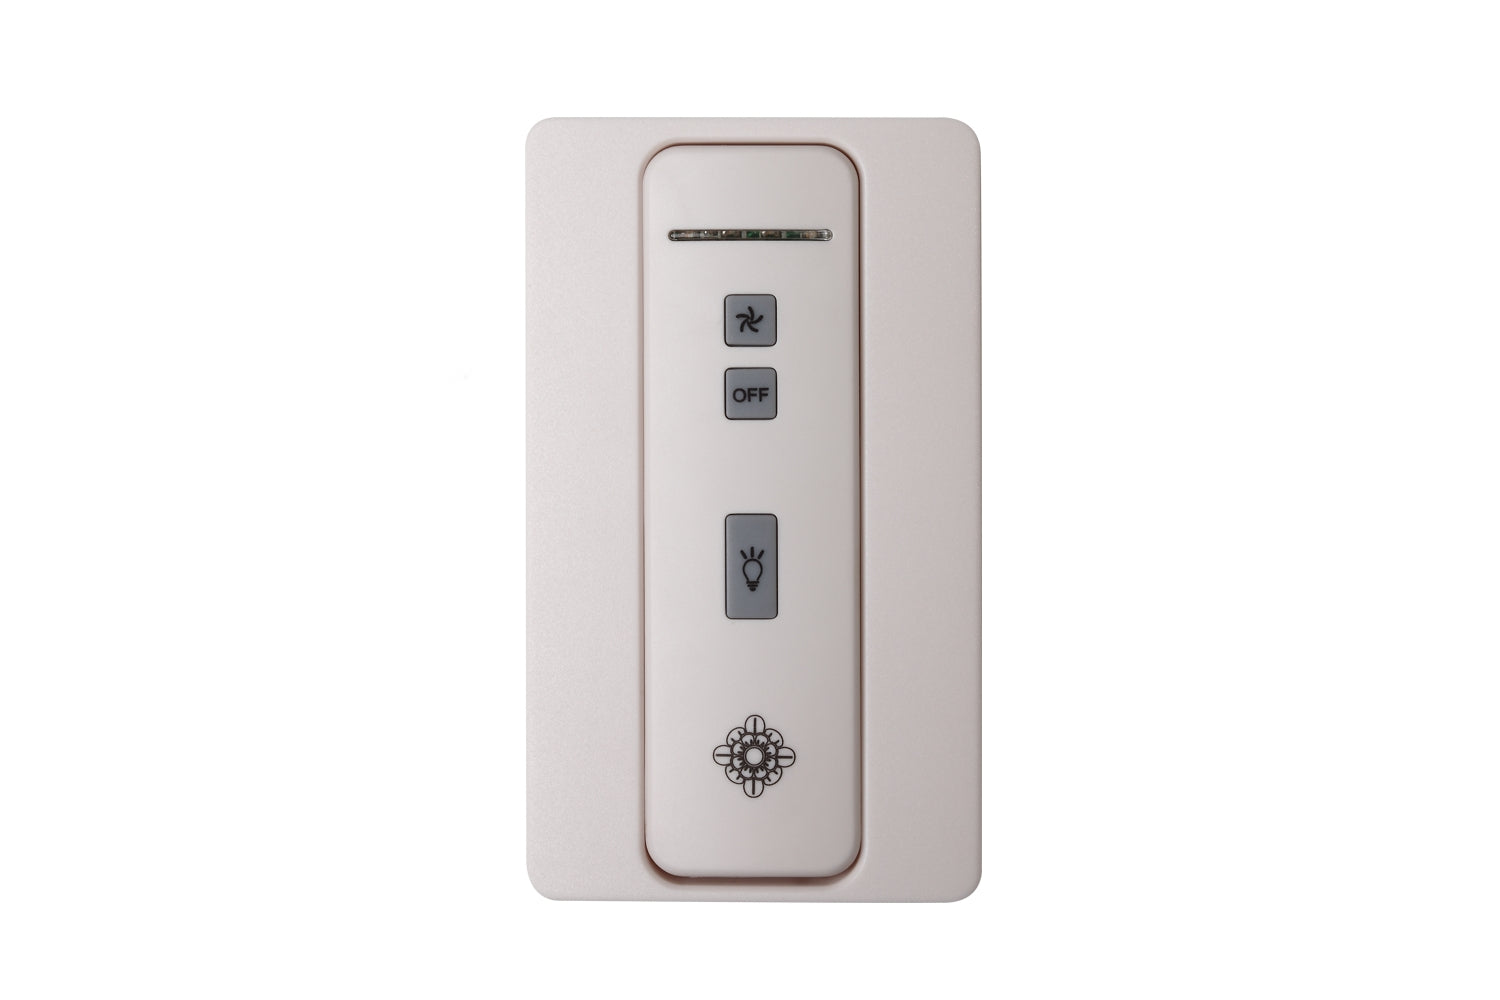 Visual Comfort Fan - MCRC1T - Hand-Held 4-Speed Remote Control,Transmitter Only - NEO Remote Control - White